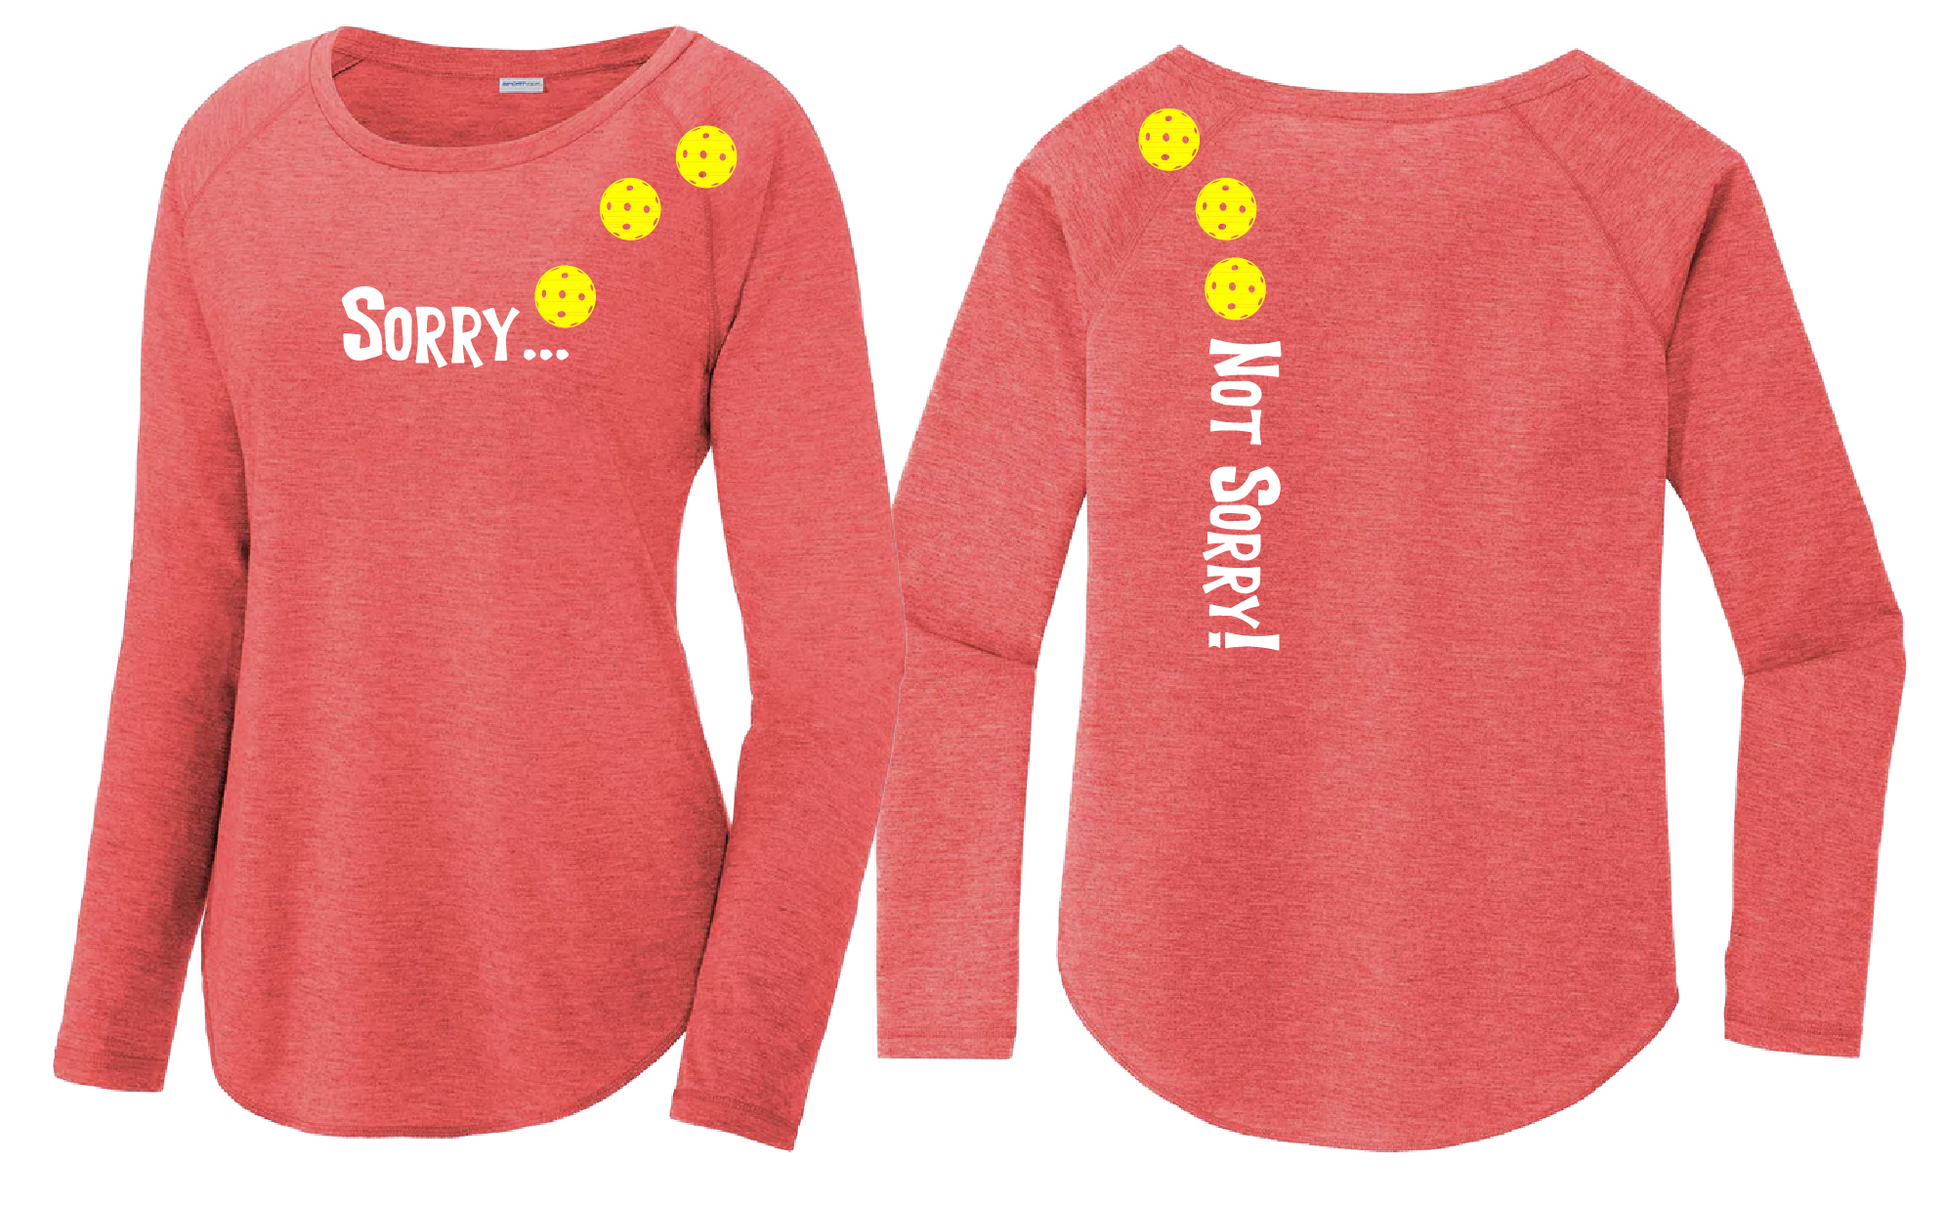  Pickleball Design: Sorry...Not Sorry with Customizable Ball Color – White, Yellow or Pink Balls Women's Styles: Long-Sleeve Scoop-Neck Turn up the volume in this Women's shirt with its perfect mix of softness and attitude. Material is ultra-comfortable with moisture wicking properties and tri-blend softness. PosiCharge technology locks in color. Highly breathable and lightweight.